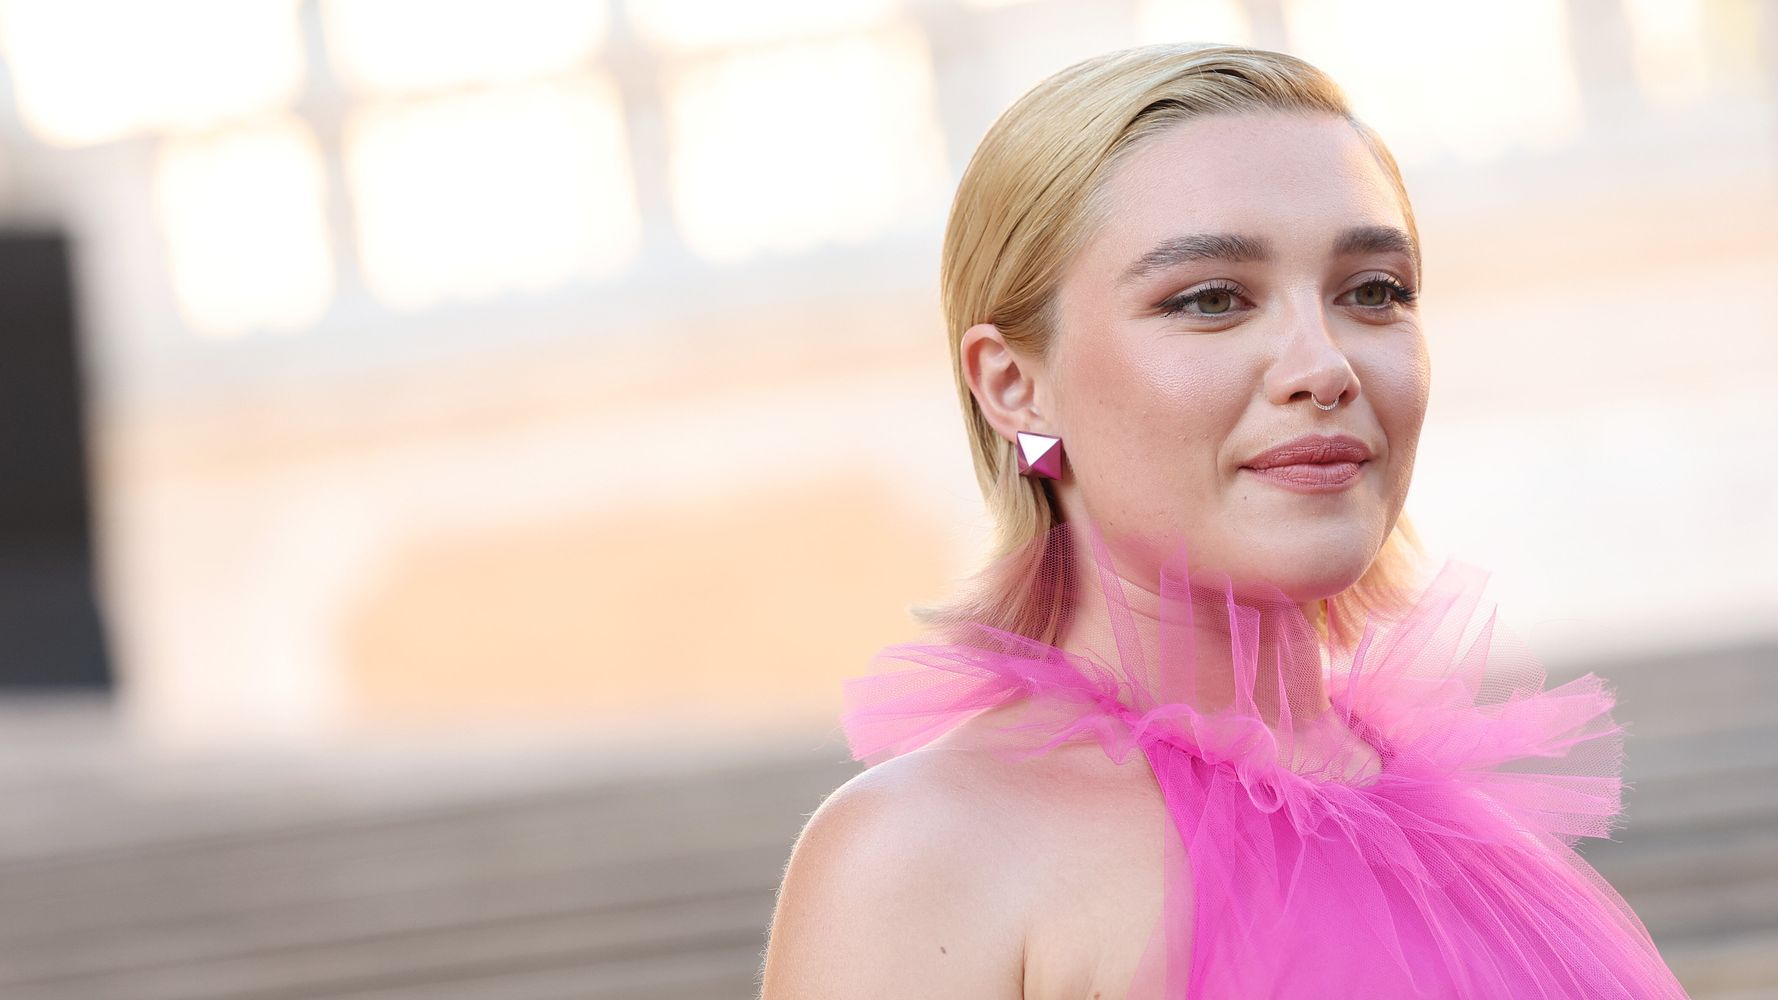 Florence Pugh Pokes Enjoyment At Instagram’s Double Standards With Sheer Gown Images